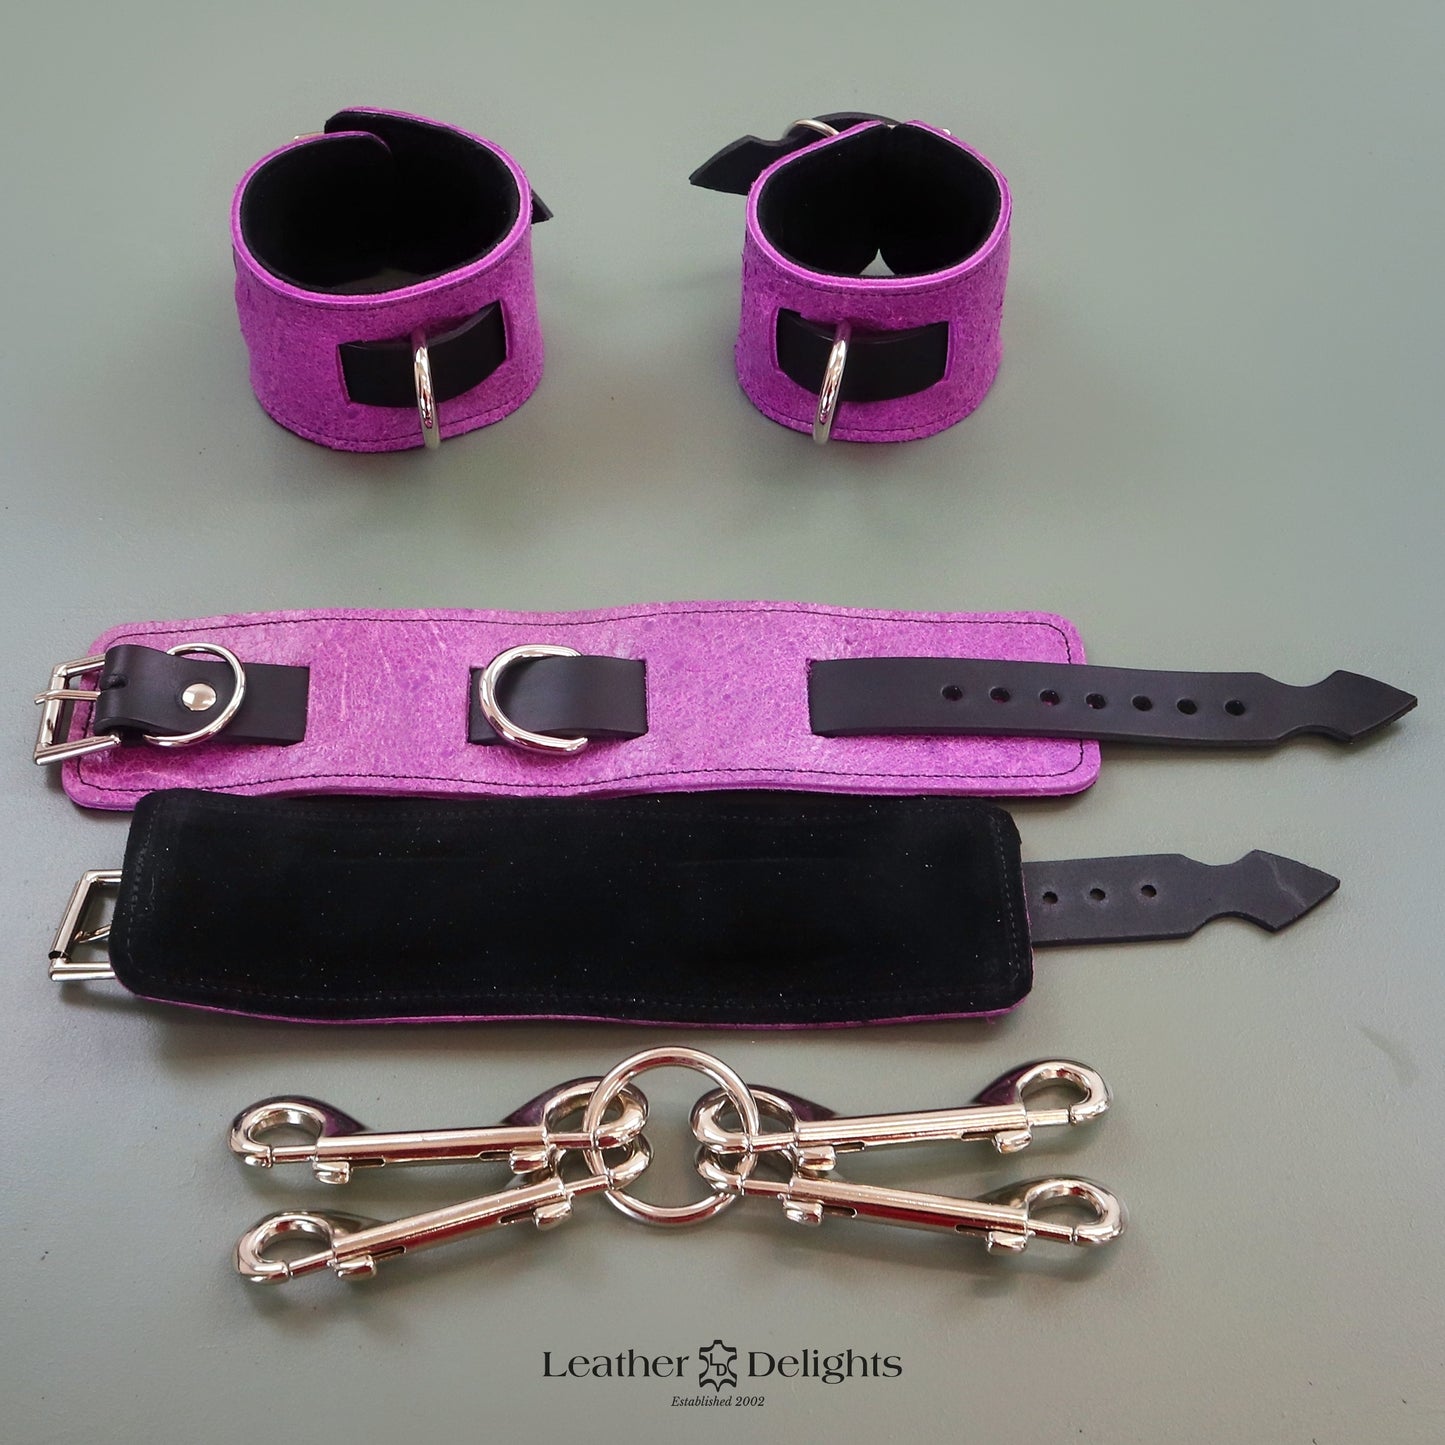 Textured Purple Leather Wrist & Ankle Cuffs with Black Suede Lining